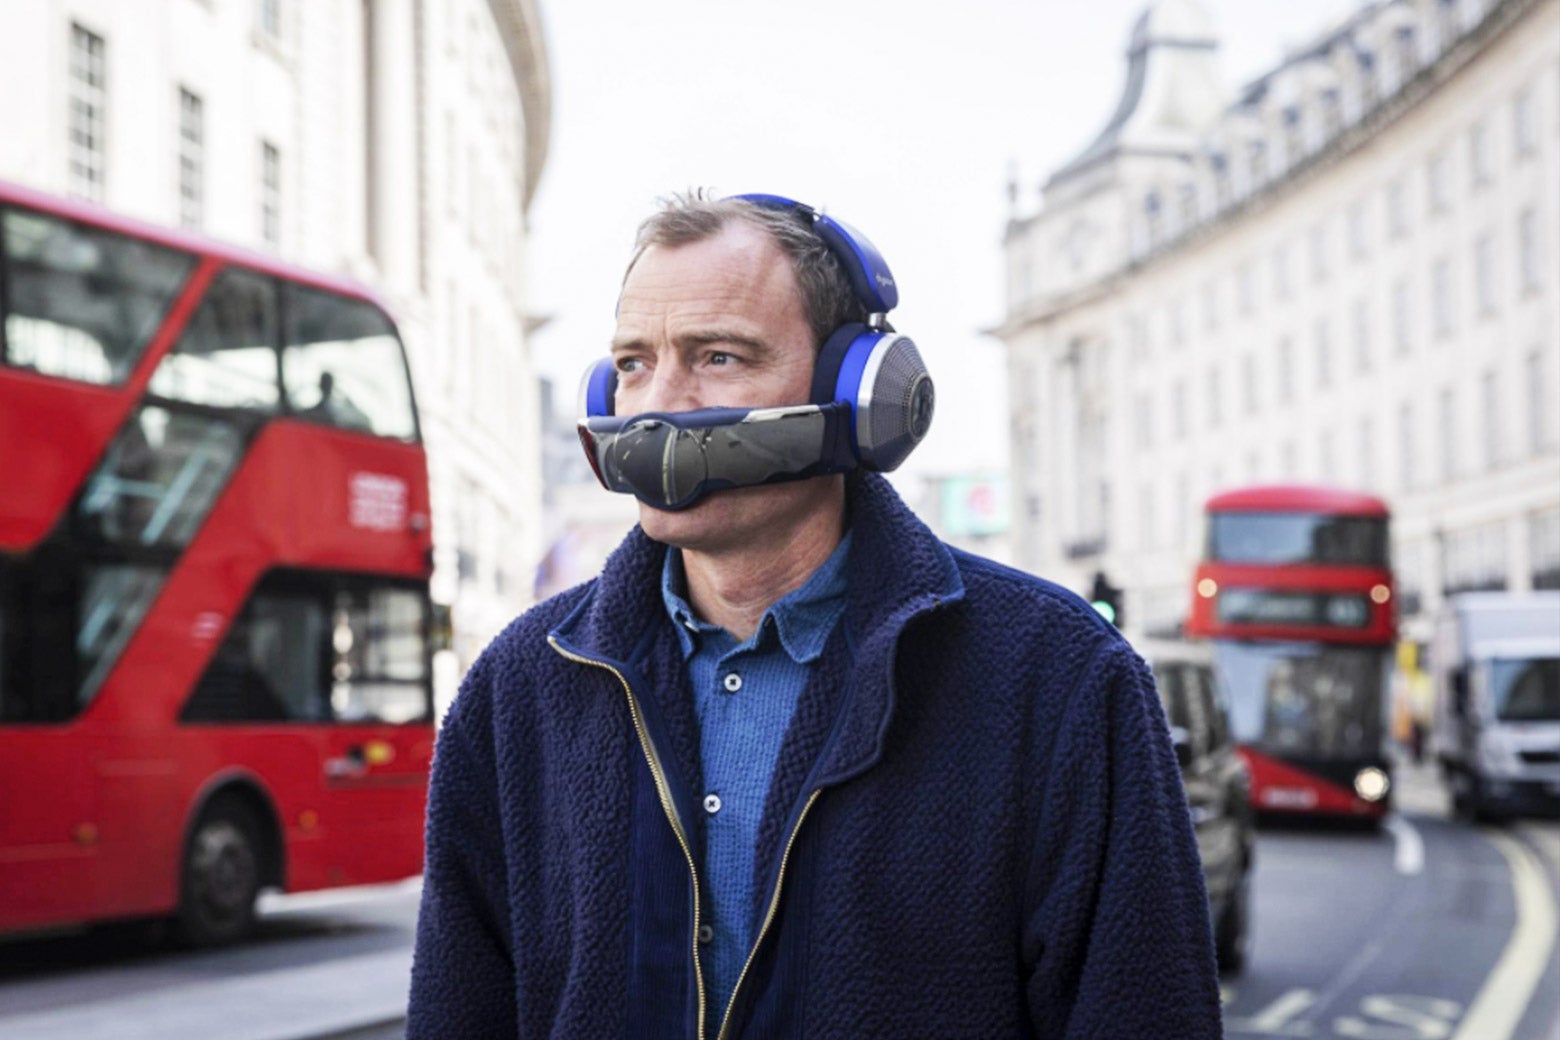 A man wearing the Dyson Zone, which looks like a pair of purple and silver headphones with a part that covers the mouth like the guys from Daft Punk, but less avant-garde and more like a mistake.